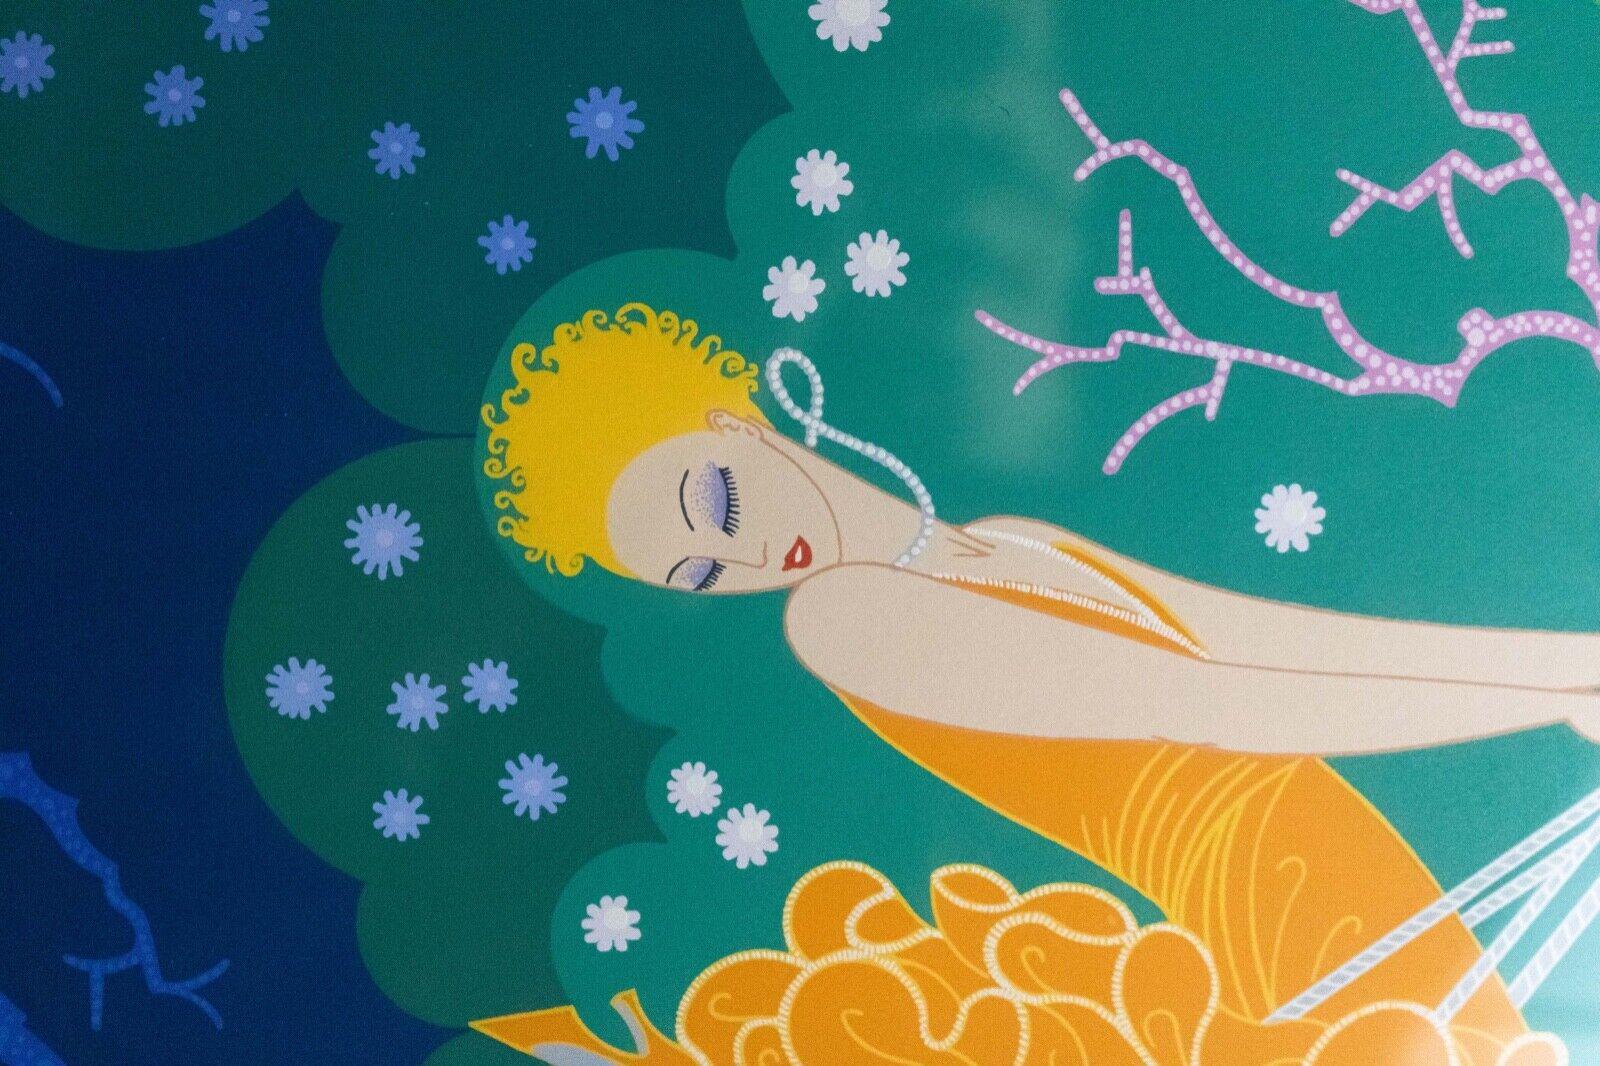 Erte the Swing Signed Art Deco Contemporary Serigraph 1984 Framed 121/300 In Good Condition For Sale In Keego Harbor, MI